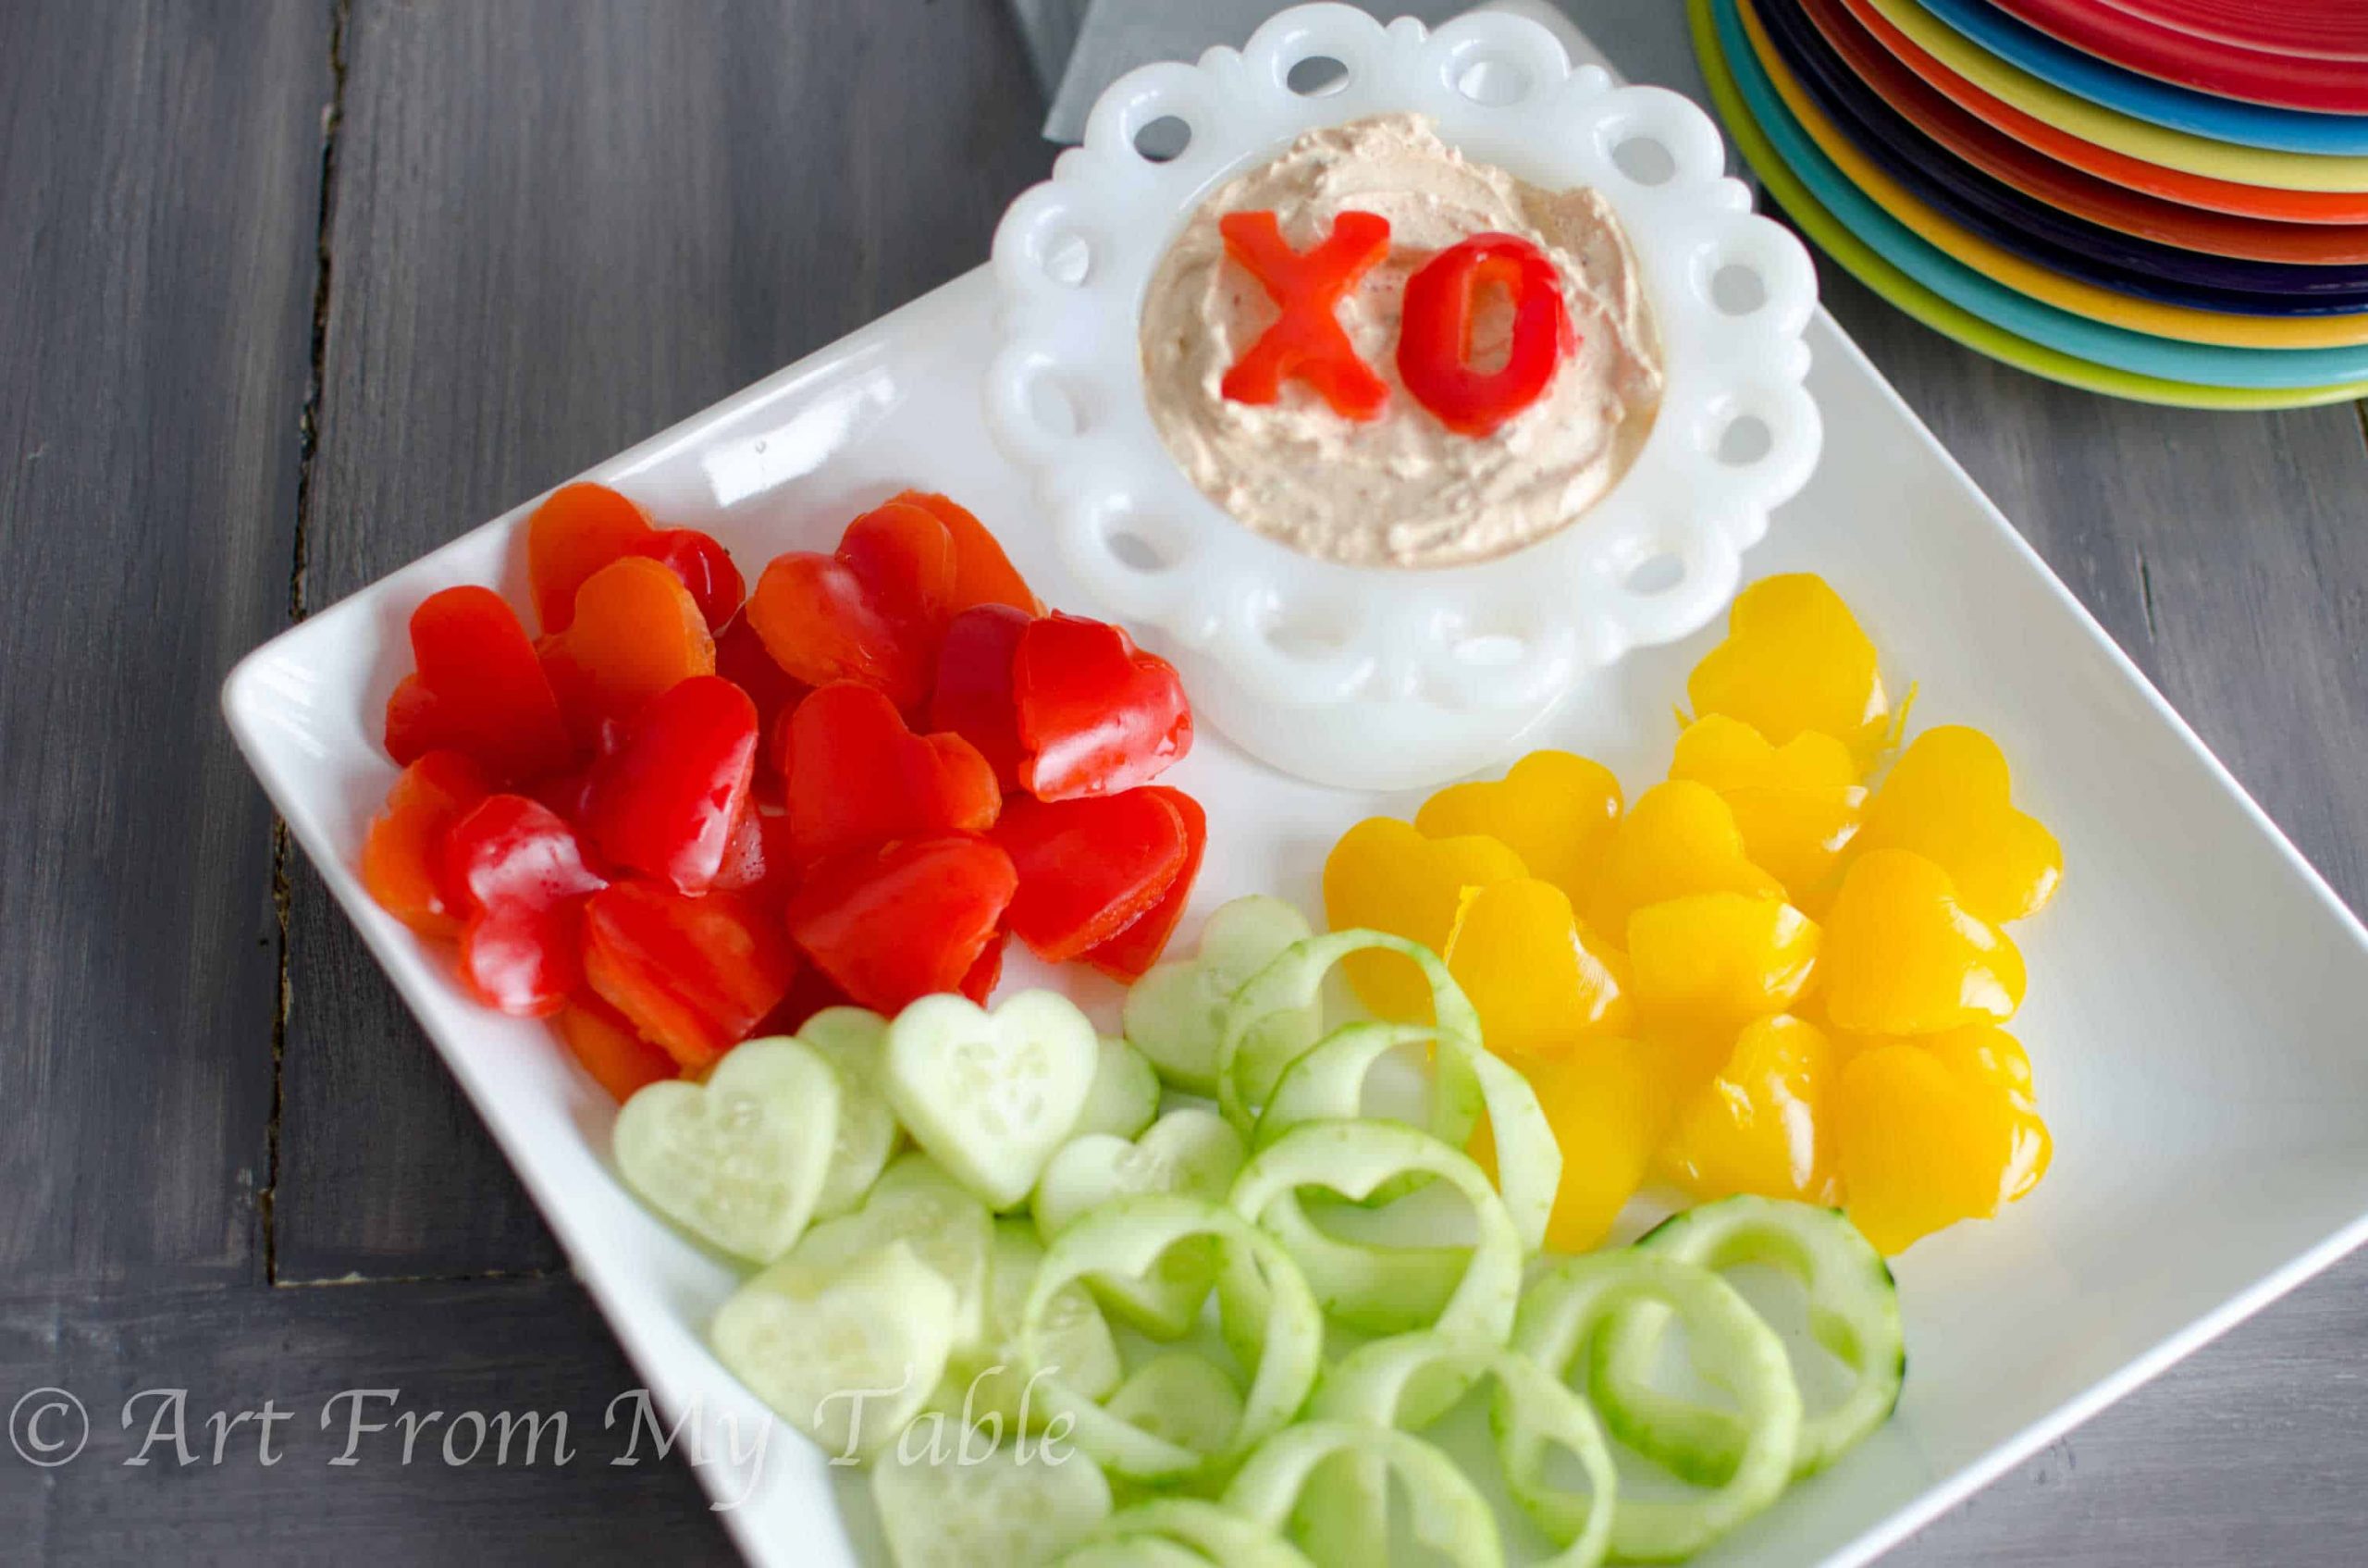 Heart shaped red and yellow bell peppers, and cucumbers on a plate with homemade veggie dip, topped with an 'x' and 'o' shaped bell pepper.